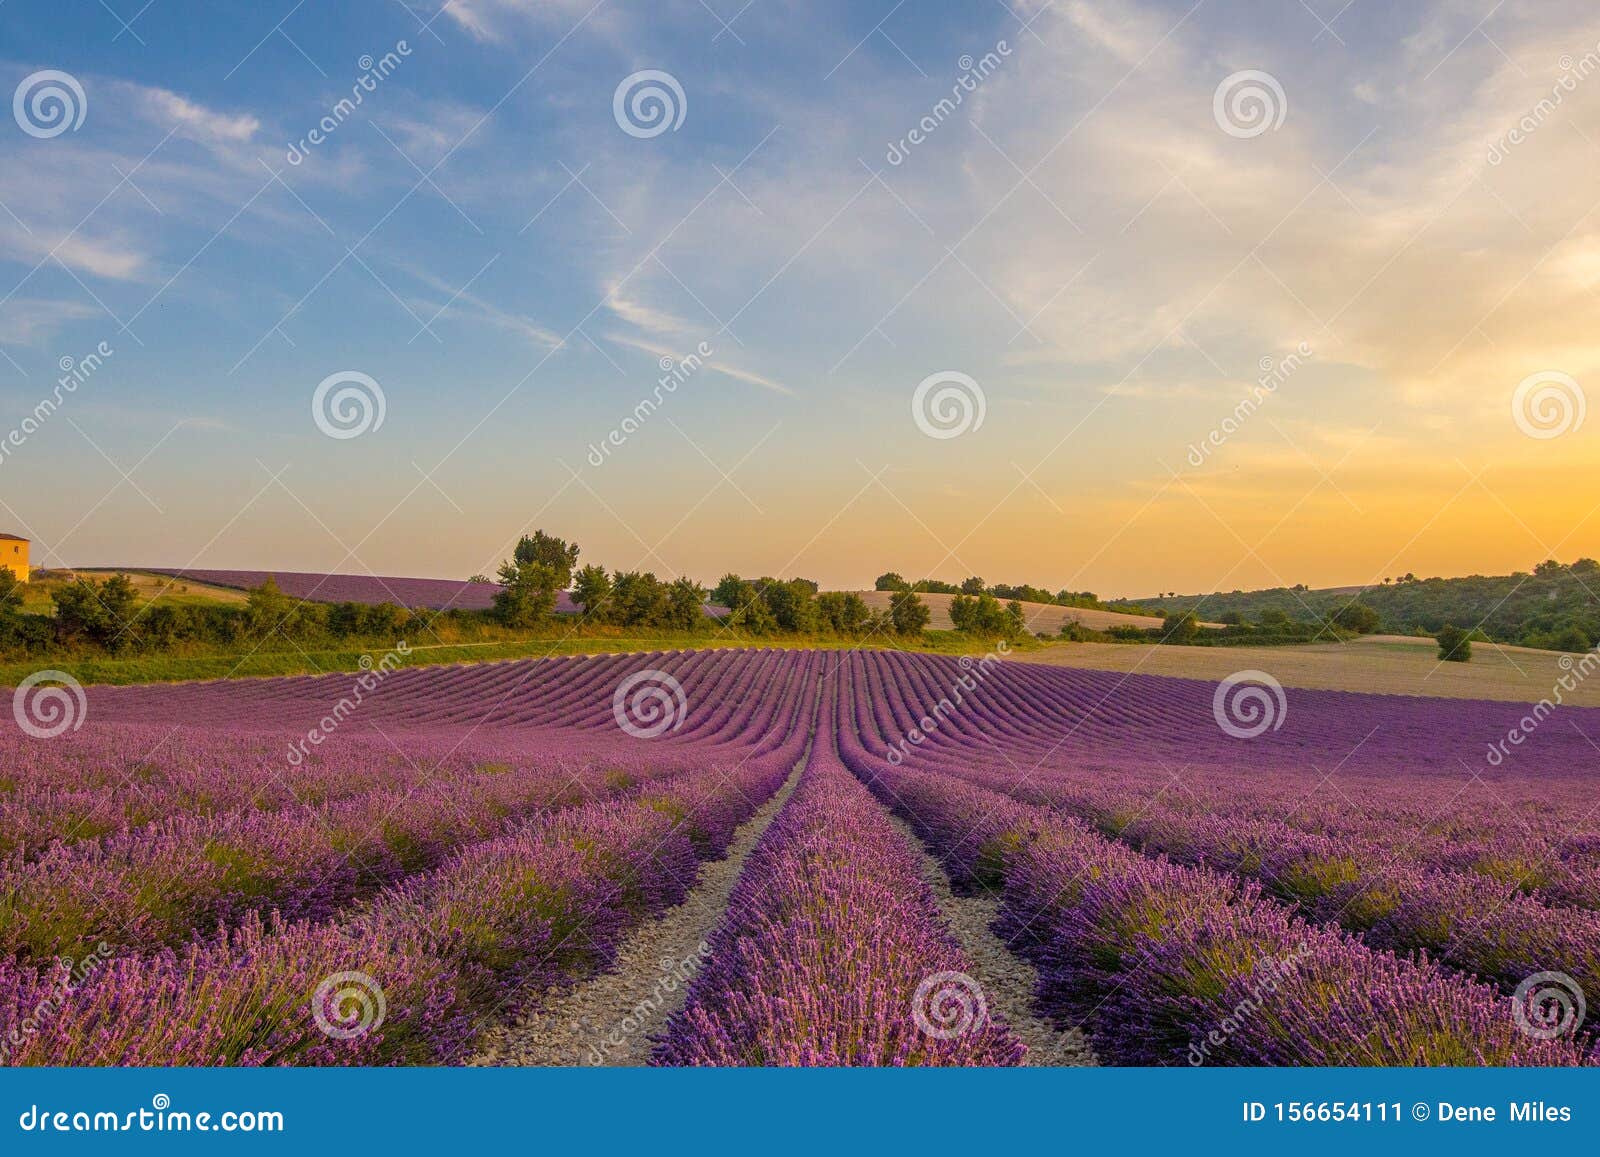 Lavender Fields at Sunset in Provence France Stock Image - Image of ...